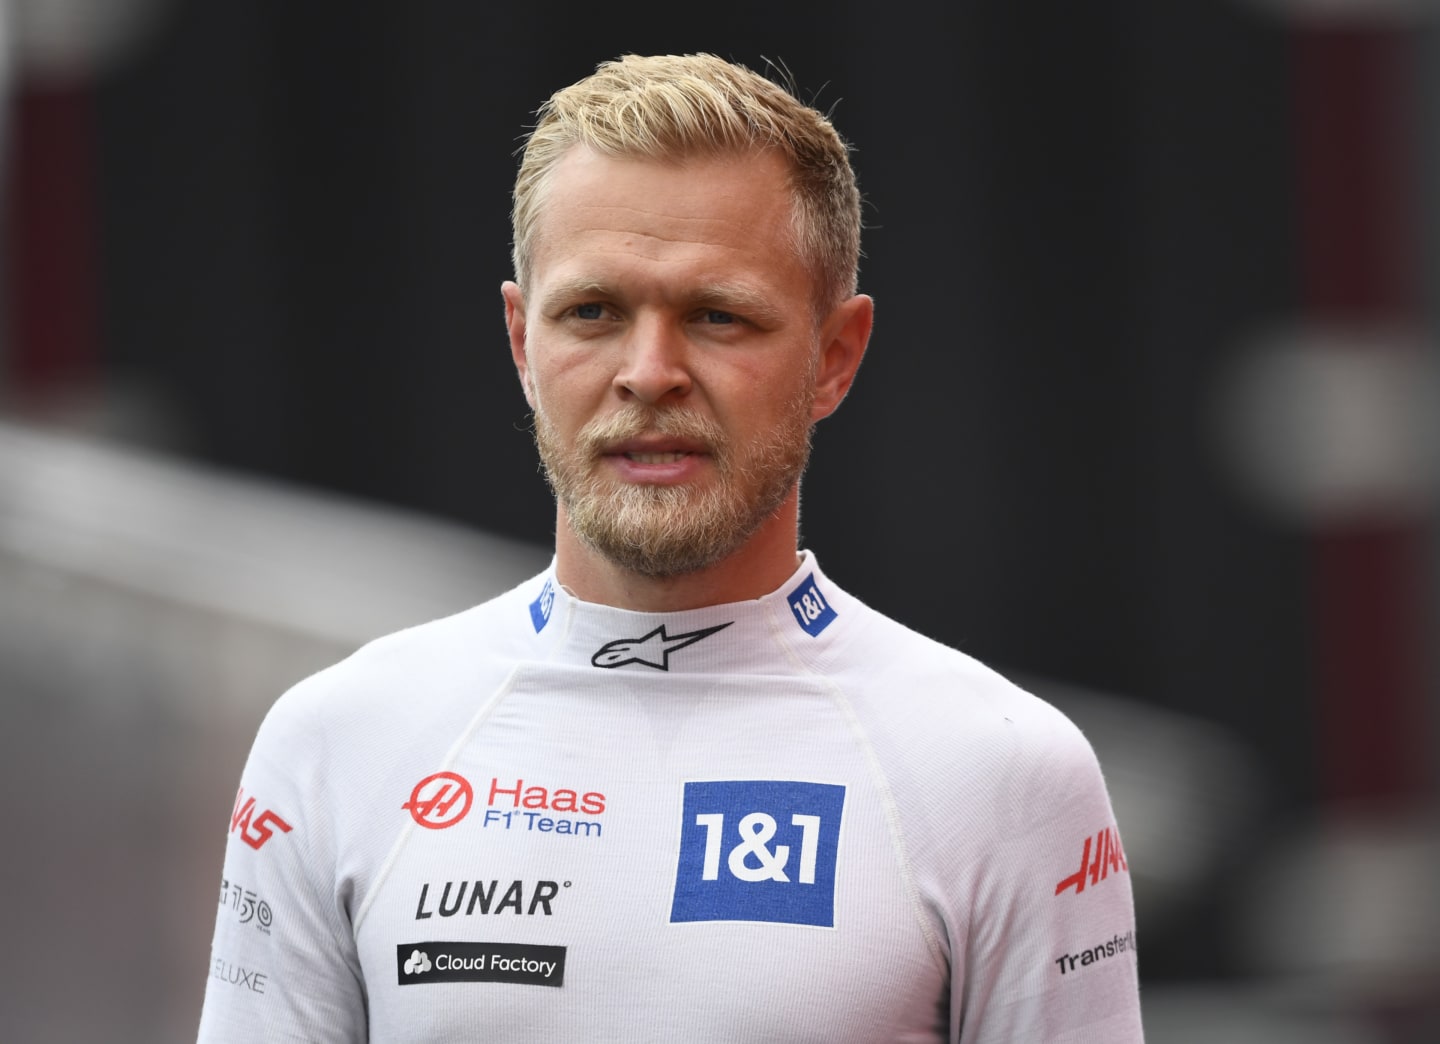 SPA, BELGIUM - AUGUST 27: 18th place qualifier Kevin Magnussen of Denmark and Haas F1 walks in the Pitlane during qualifying ahead of the F1 Grand Prix of Belgium at Circuit de Spa-Francorchamps on August 27, 2022 in Spa, Belgium. (Photo by Rudy Carezzevoli/Getty Images)